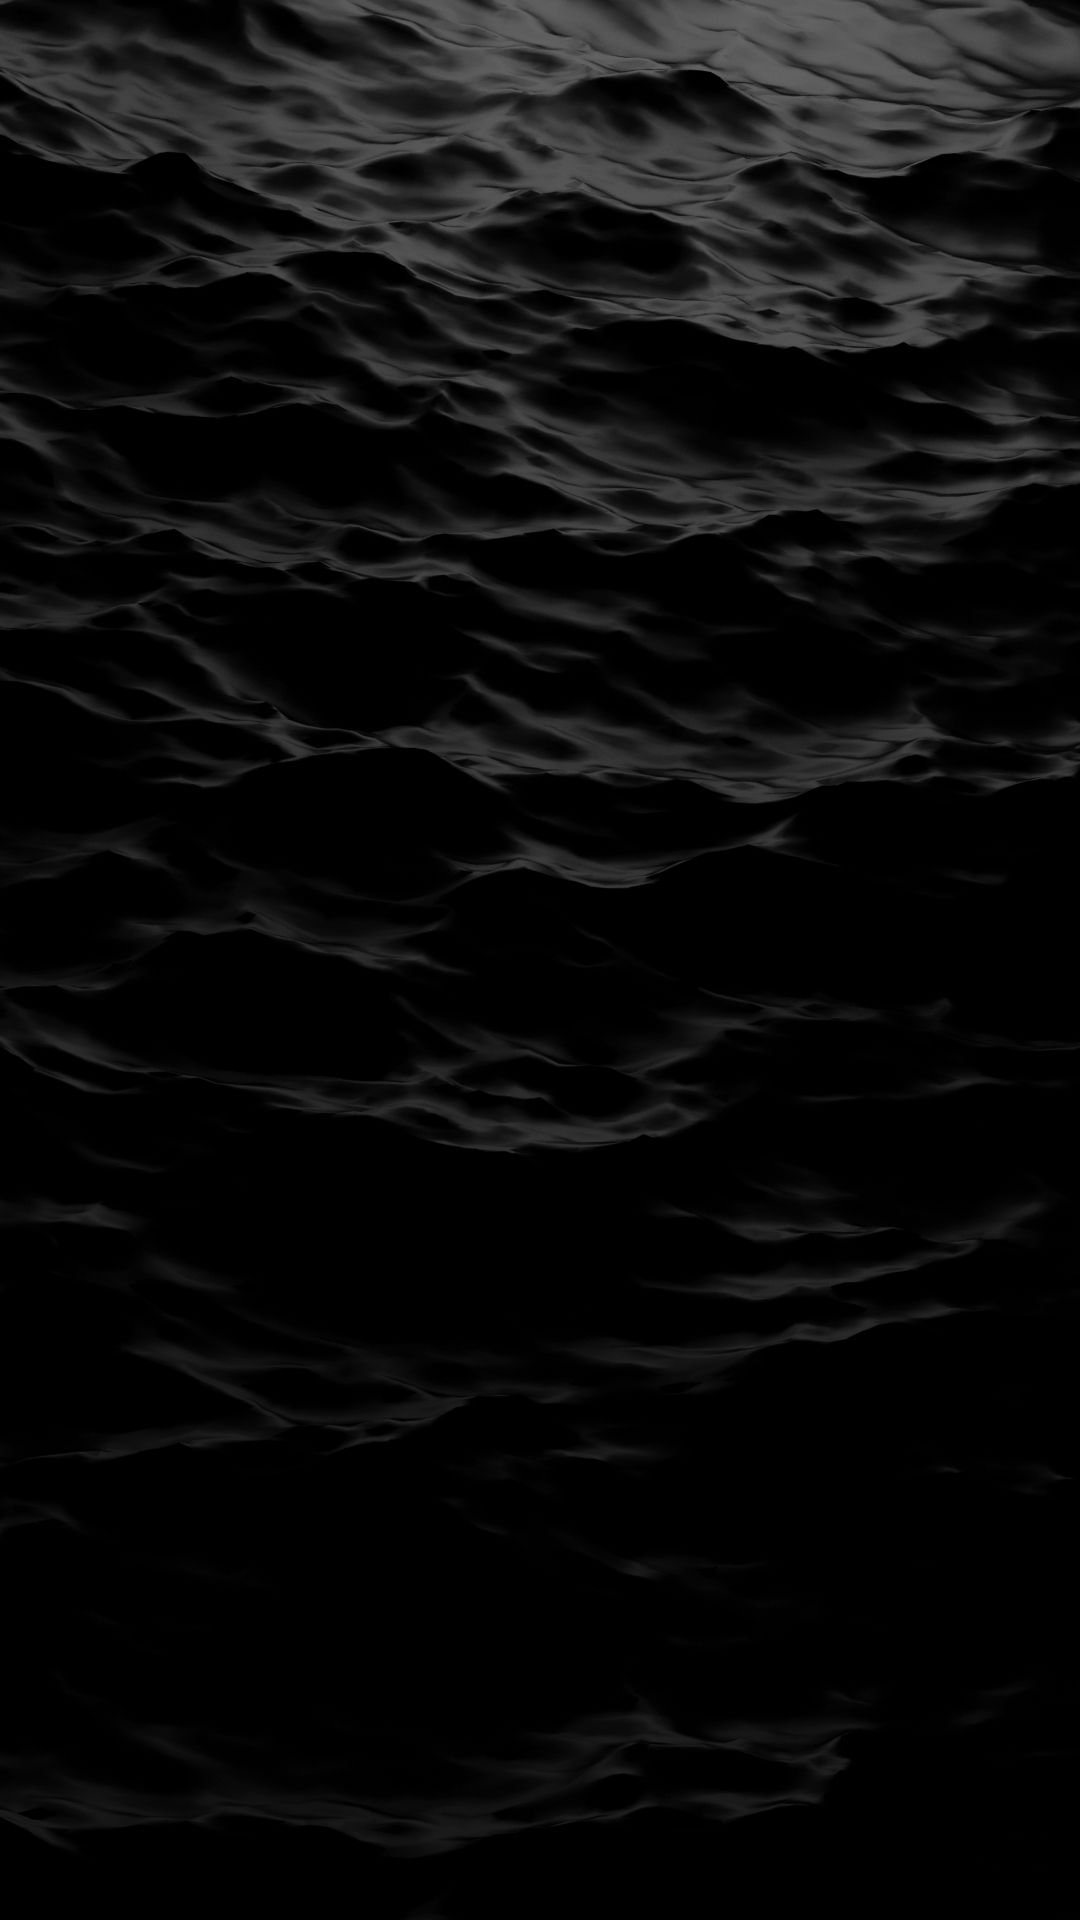 A black and white photo of waves in the ocean - Black, fire, dark, dark phone, black phone, ocean, water